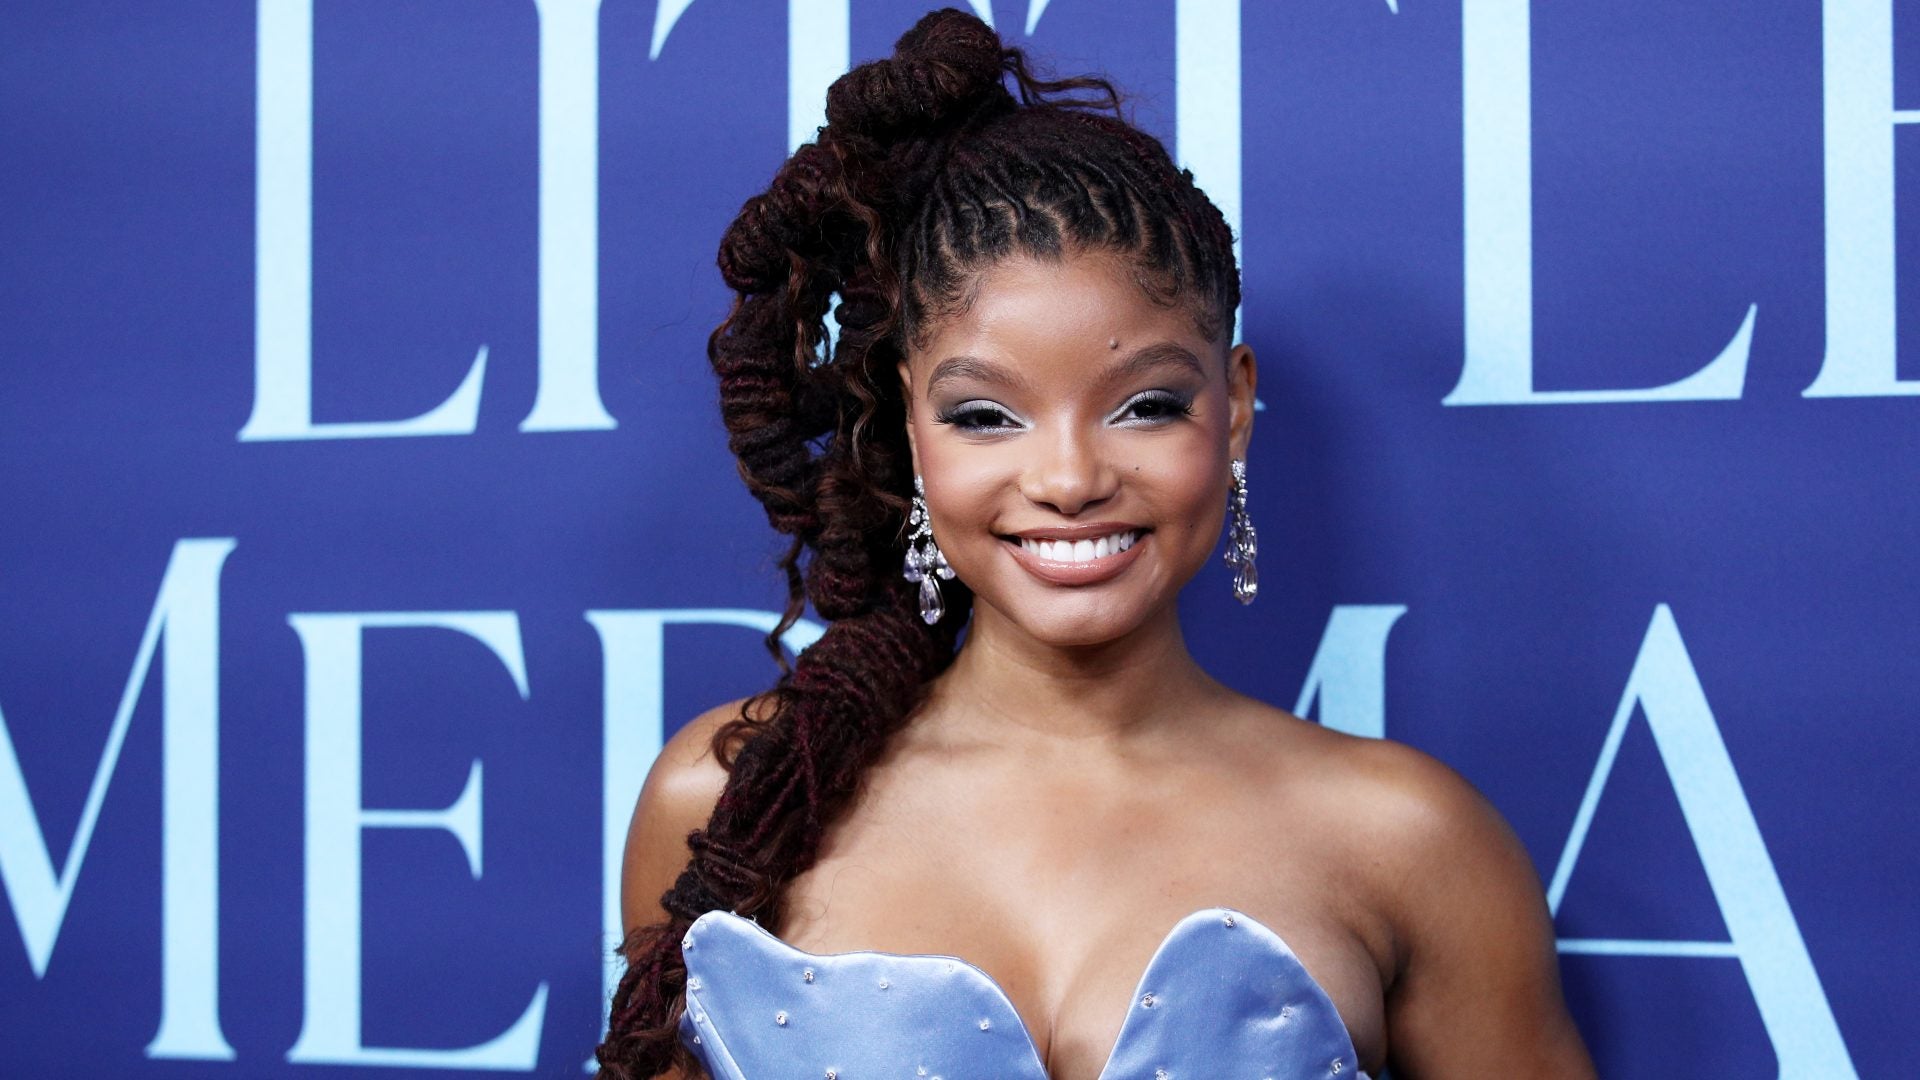 WATCH: Halle Bailey Says She's Ready To Inspire Little Girls Everywhere With Her Role In "The Little Mermaid"